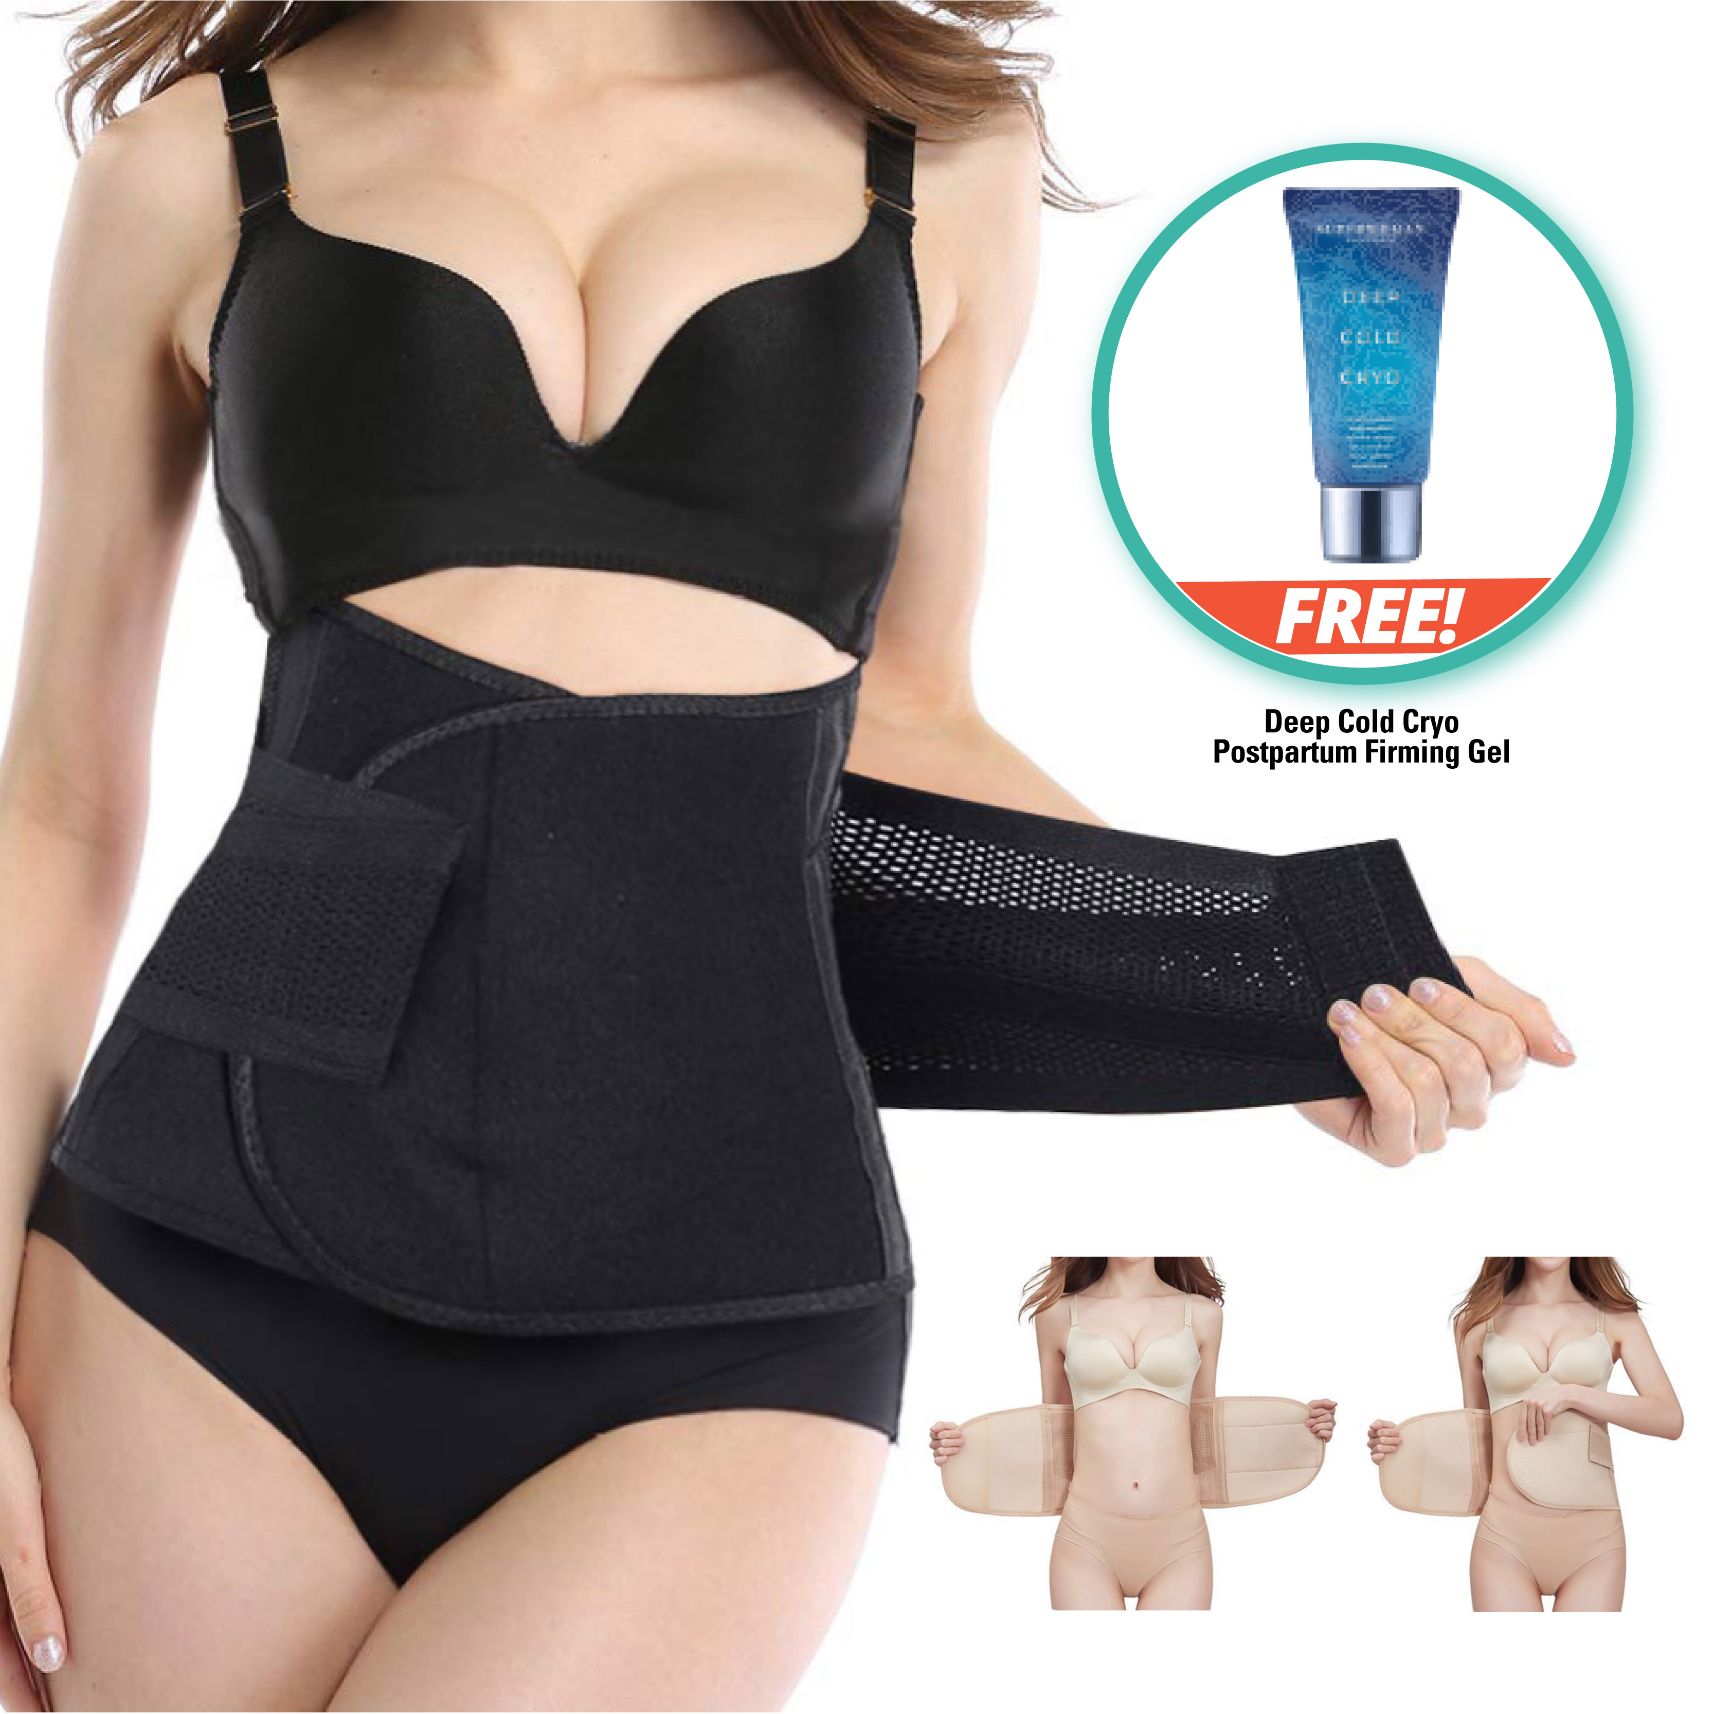 SUPERWOMAN Barely Belly Maternity Recovery Binder + Free Deep Cold Cryo Postpartum Firming Gel